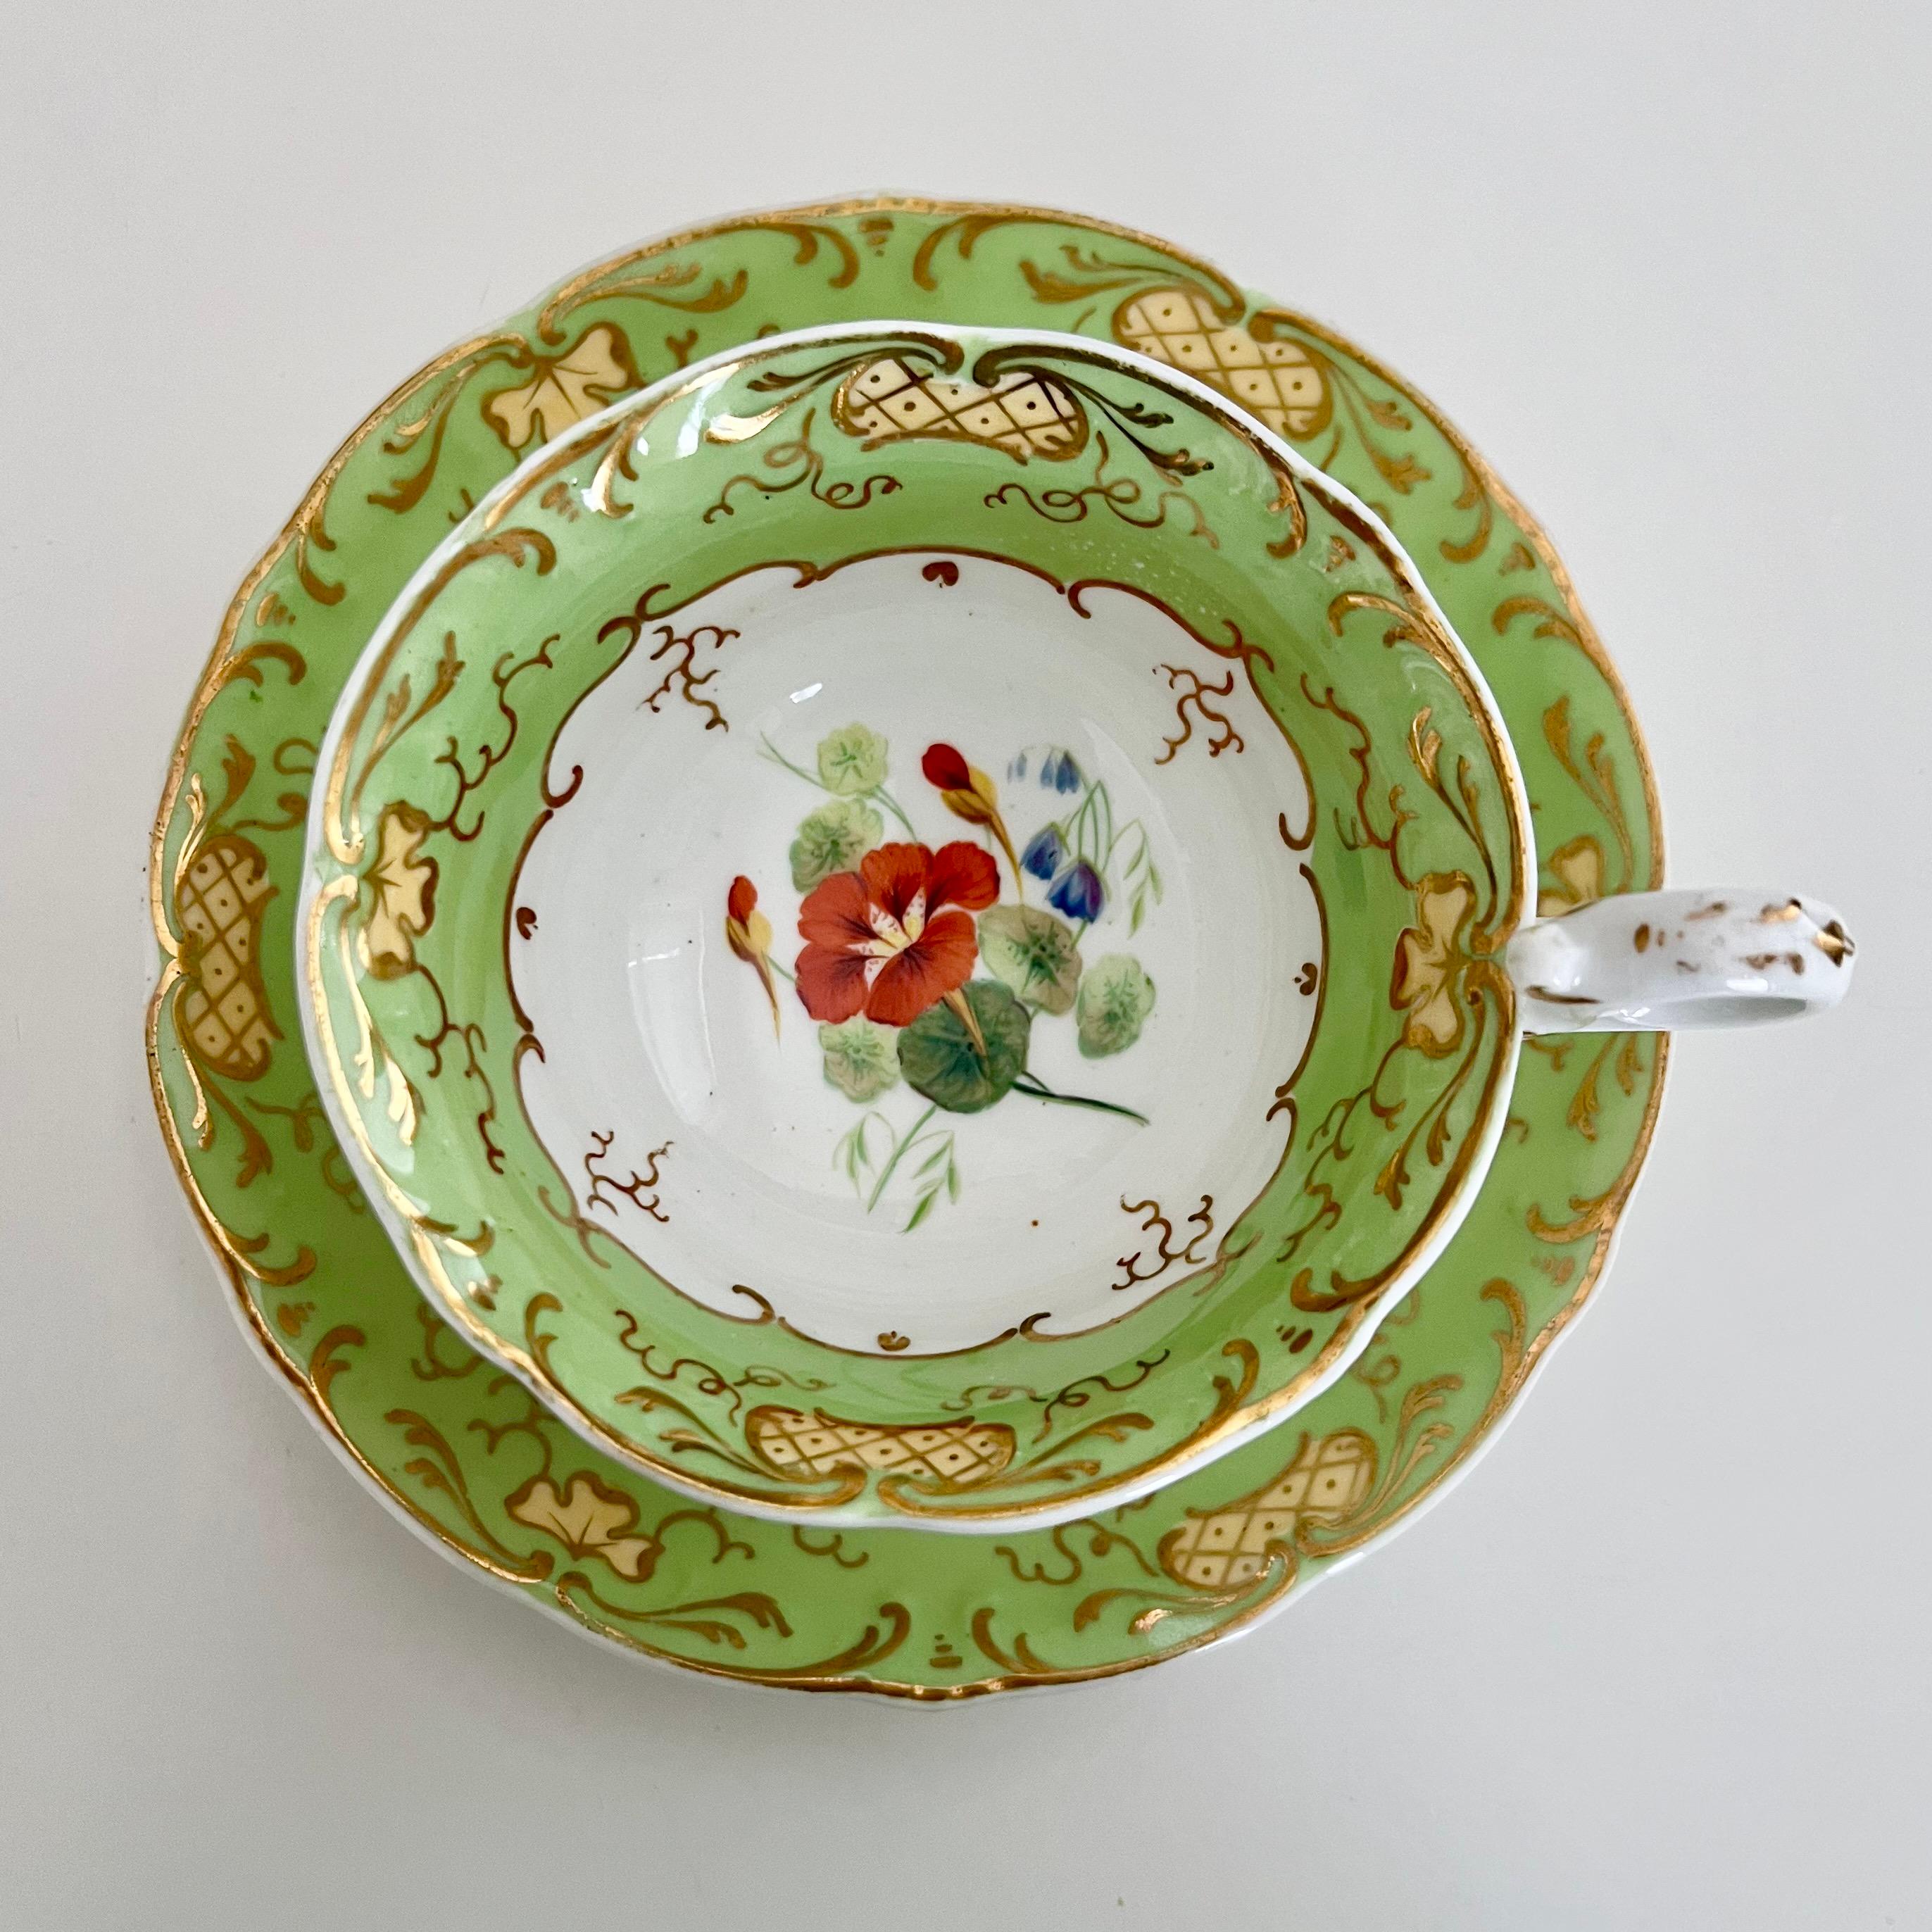 Hand-Painted Teacup H&R Daniel, Apple Green with Red Flowers, Rococo Revival, circa 1840